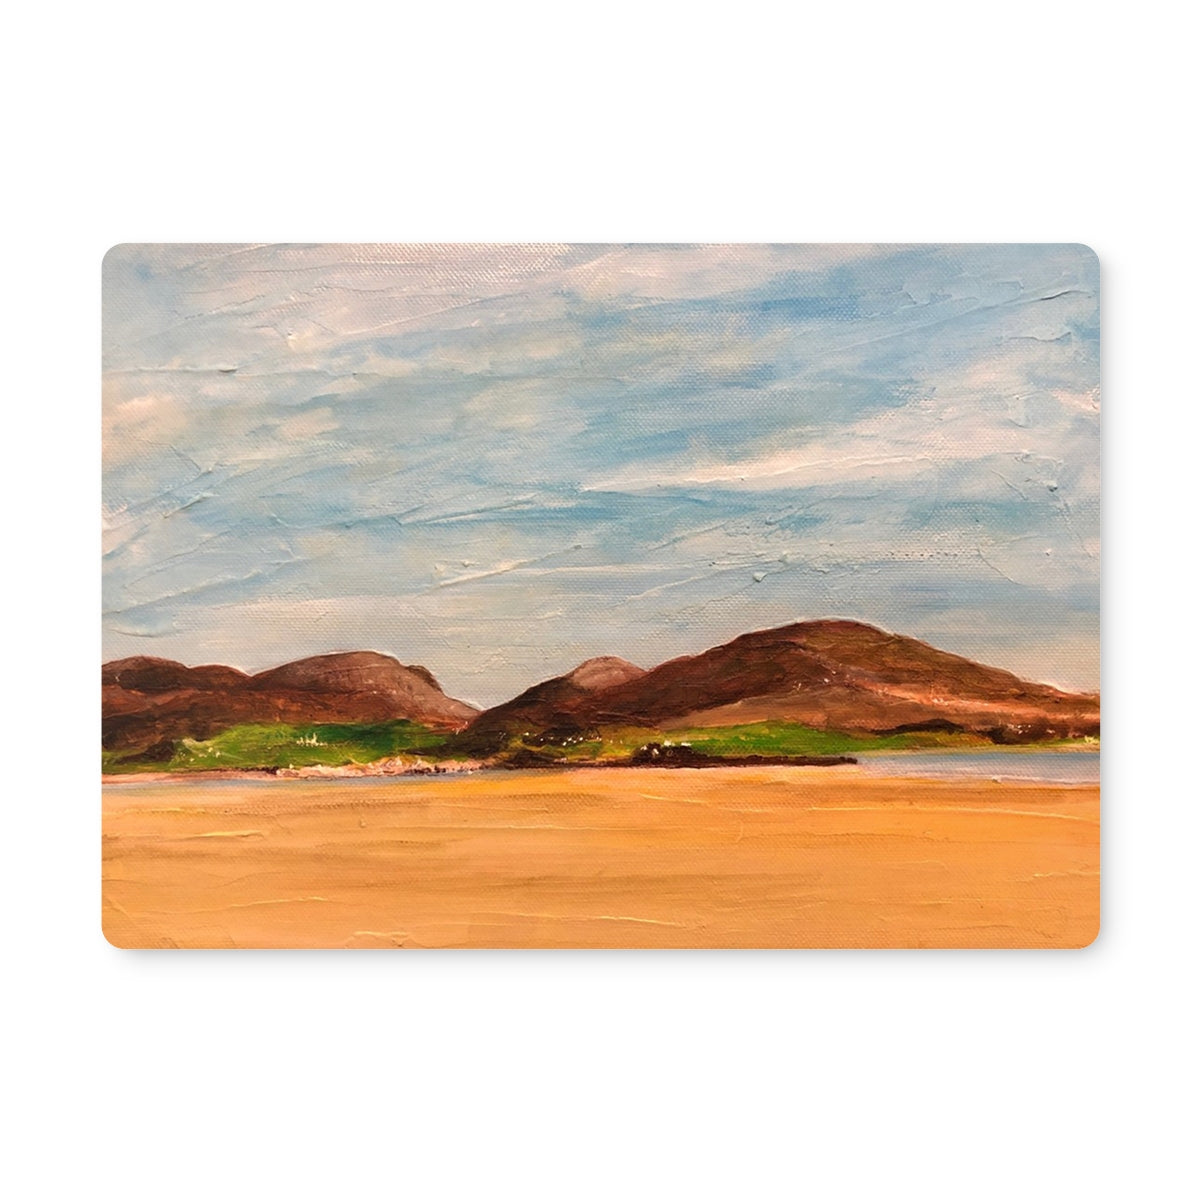 Uig Sands Lewis Art Gifts Placemat-Placemats-Hebridean Islands Art Gallery-2 Placemats-Paintings, Prints, Homeware, Art Gifts From Scotland By Scottish Artist Kevin Hunter